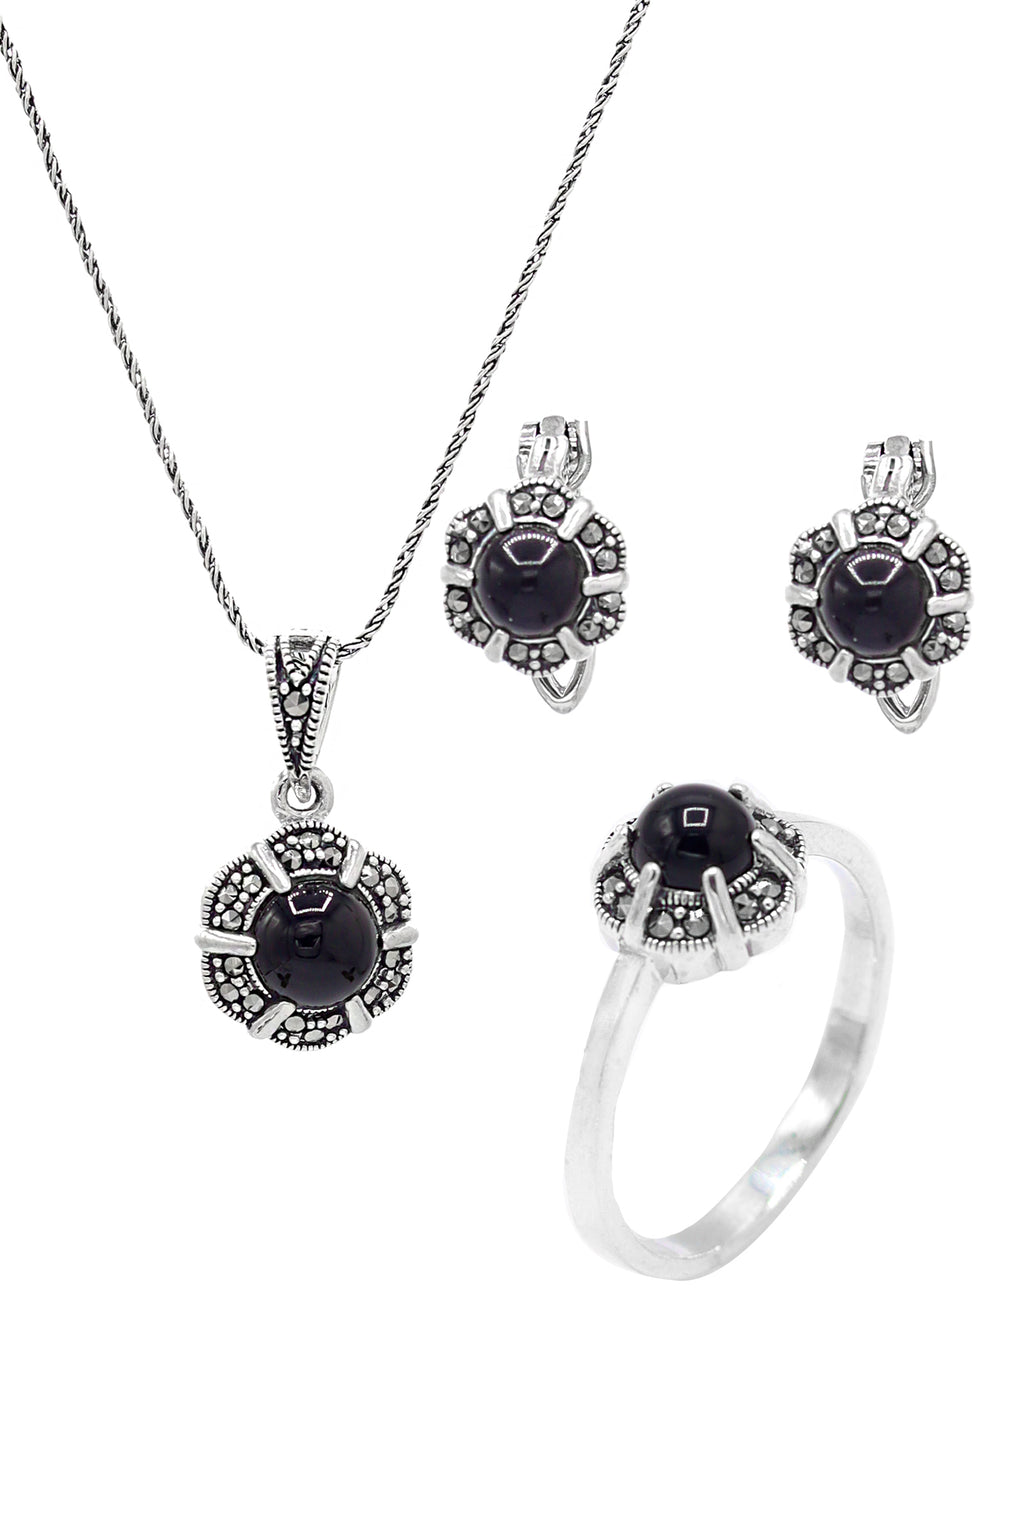 Floral Model Silver Triple Jewelry Set With Onyx (NG201021951)